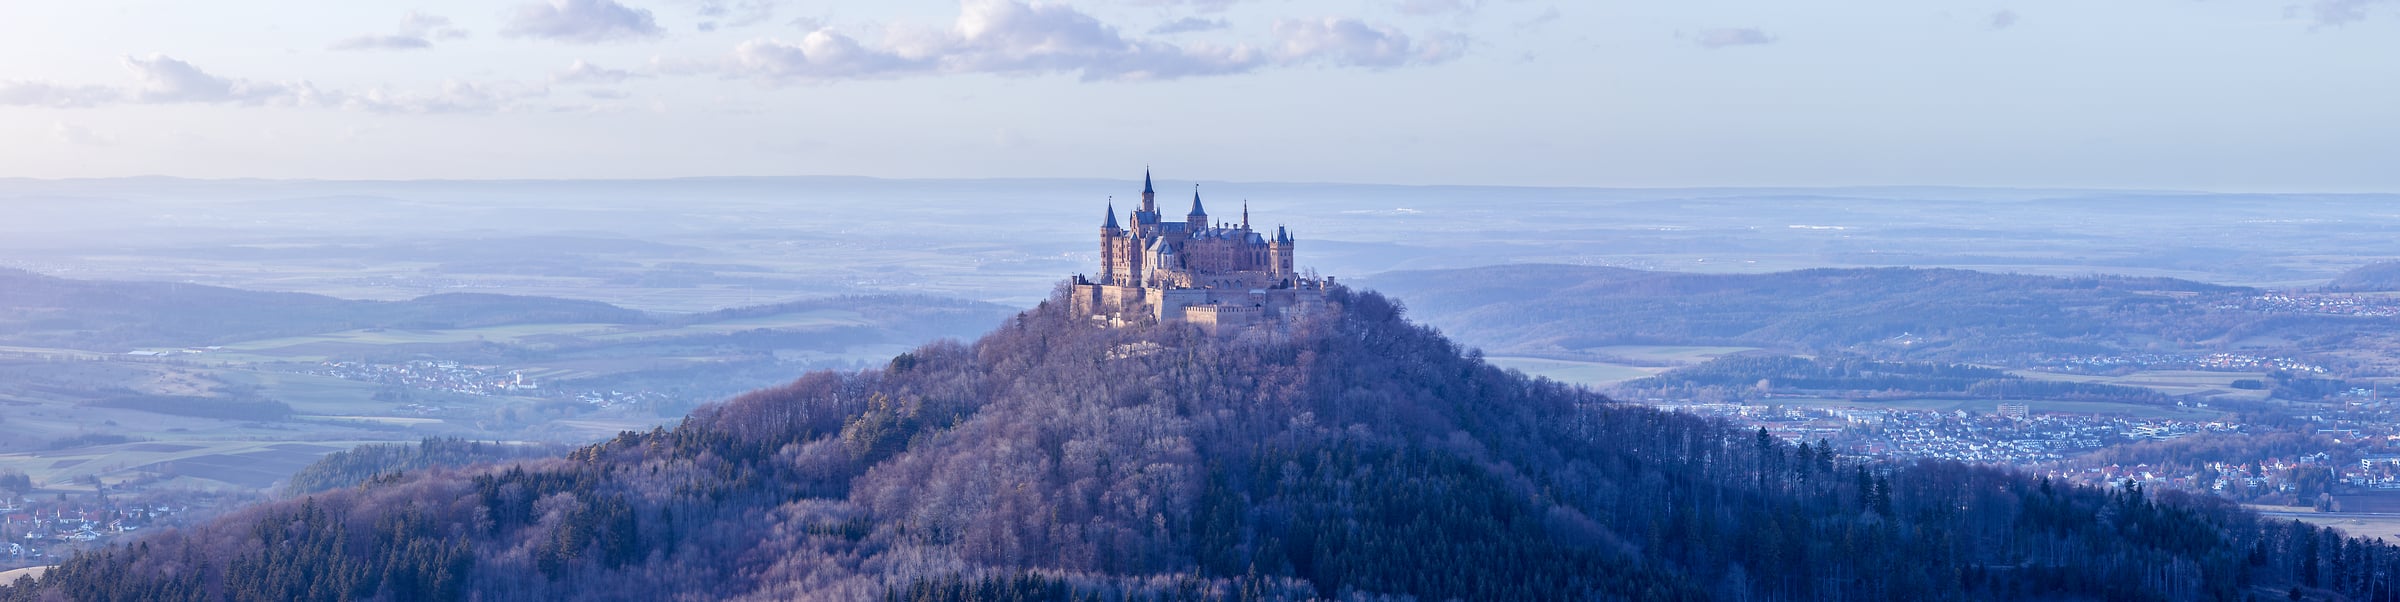 208 megapixels! A very high resolution, landscape photo print of a beautiful castle on top of a mountain with rolling hills in the background; landscape photograph created by Assaf Frank in Zellerhorn Gipfel, Albstadt, Germany.